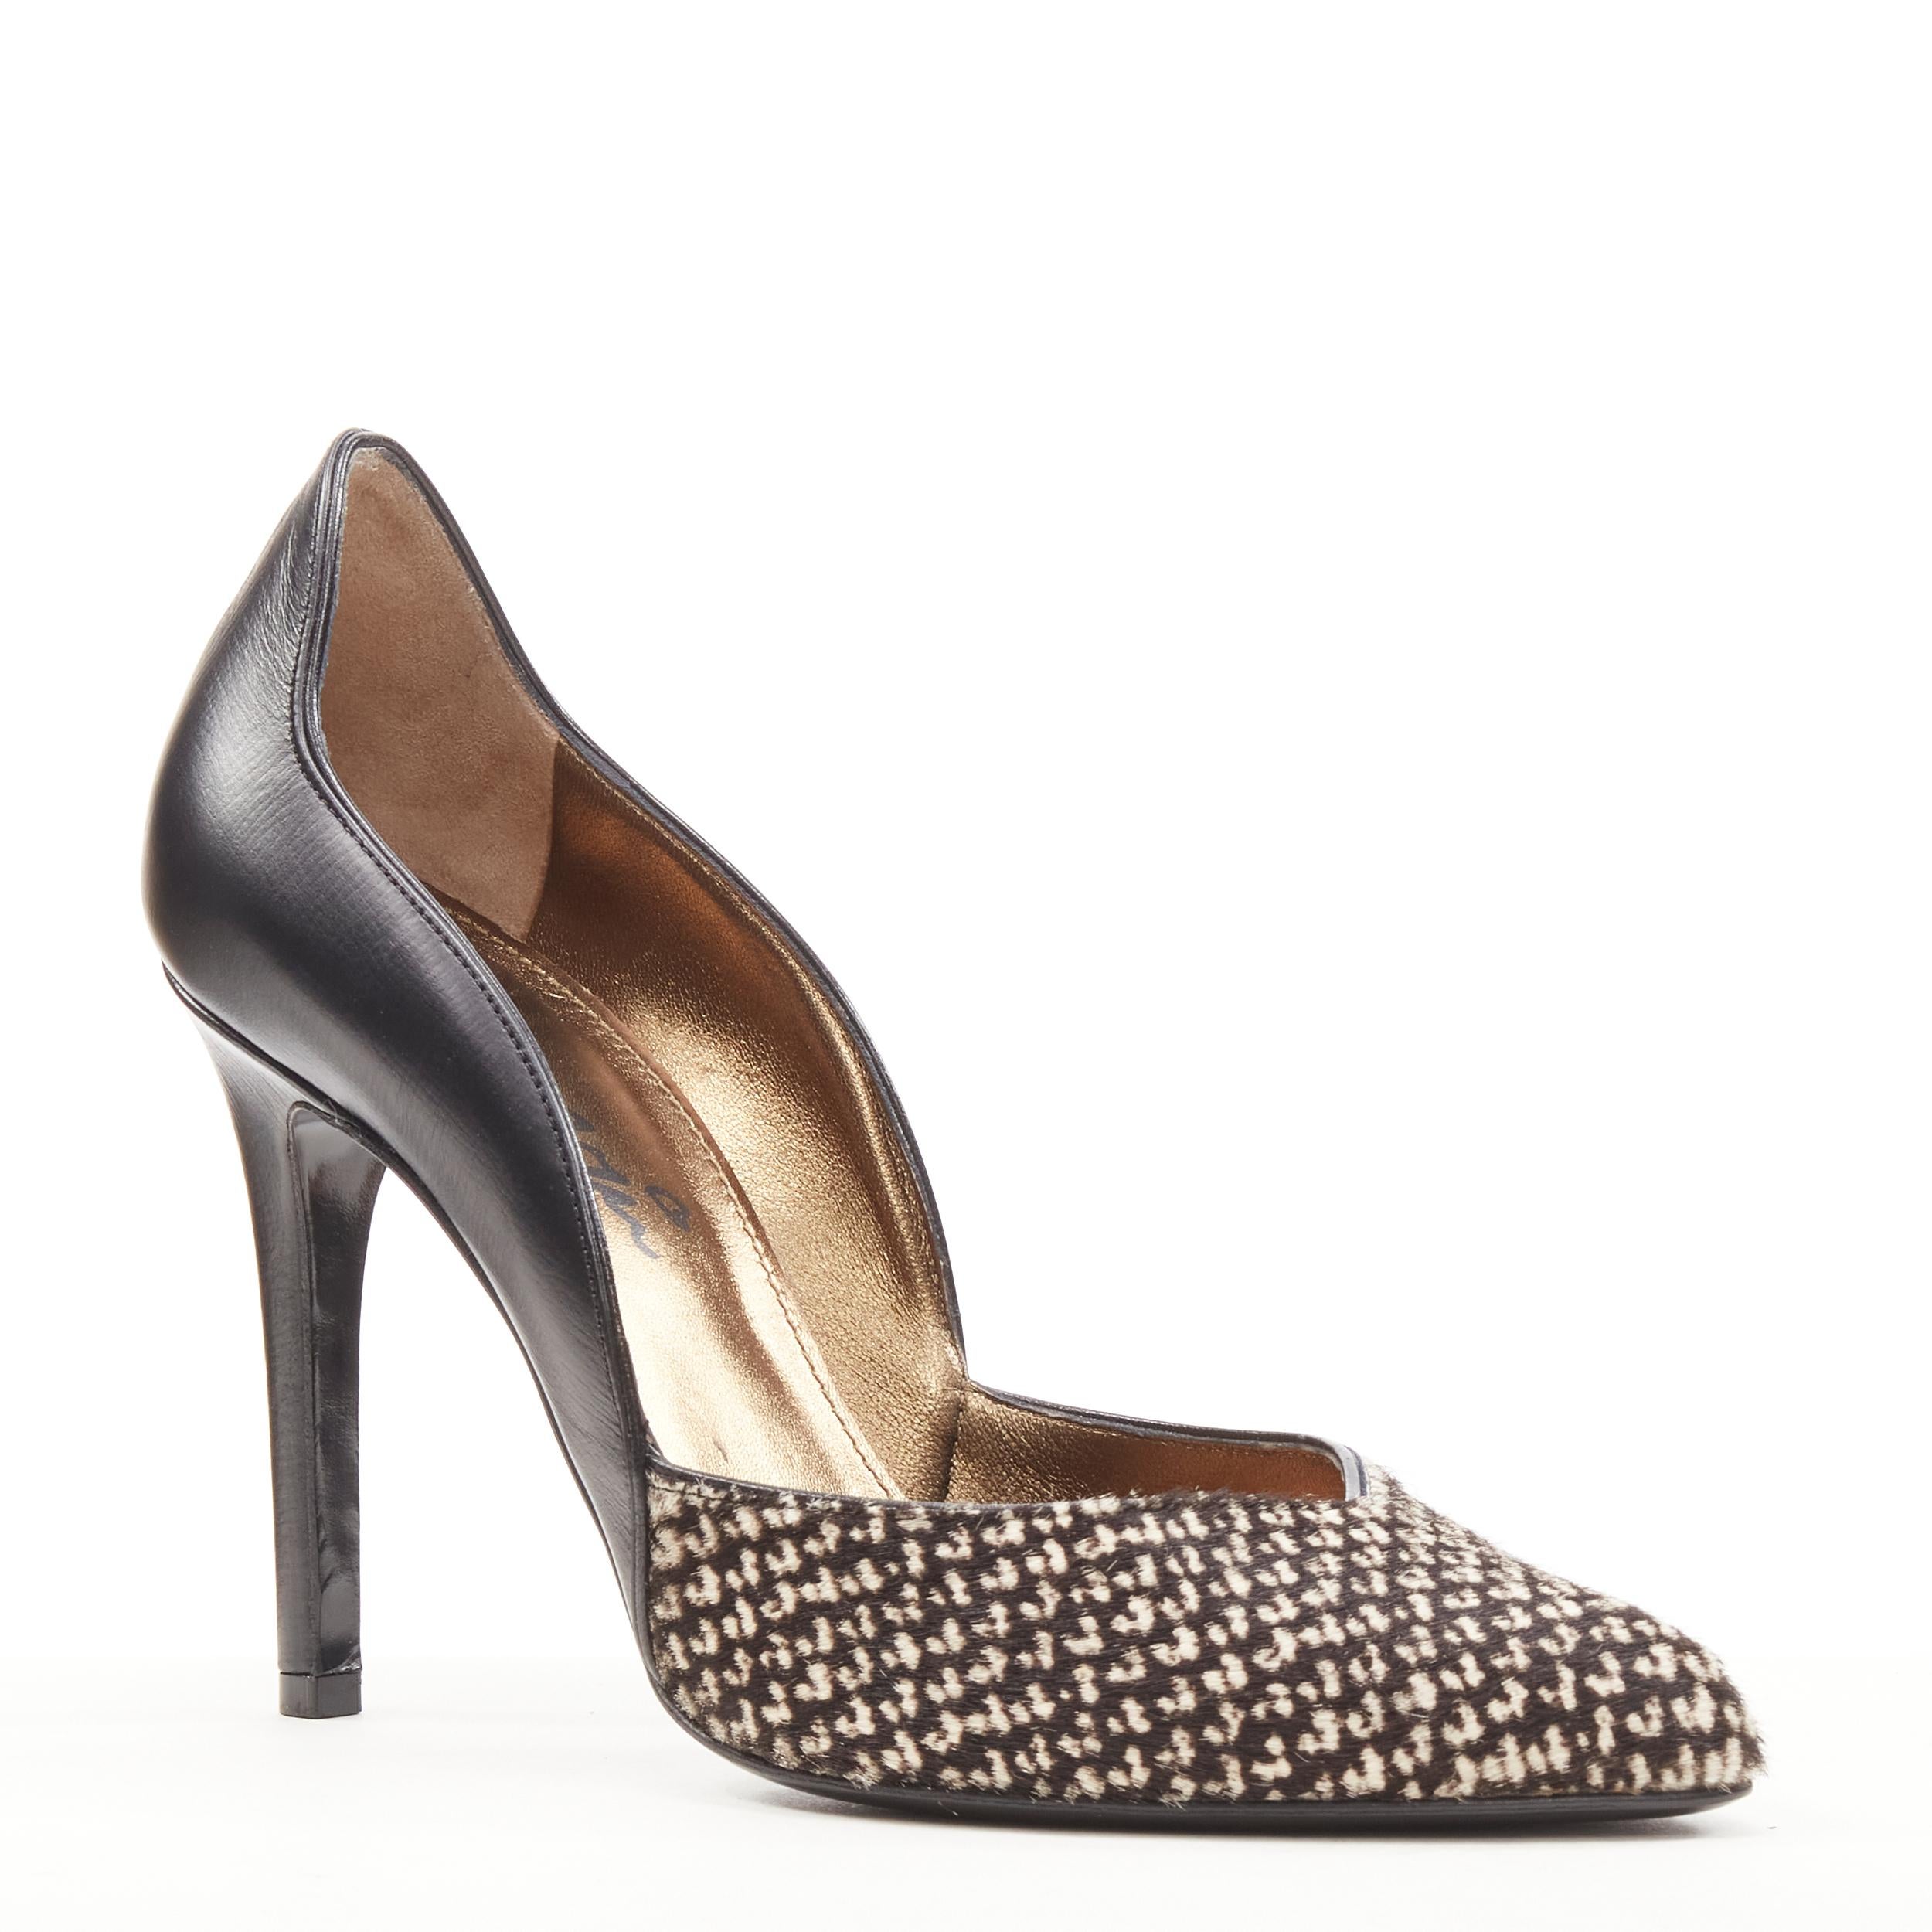 LANVIN Alber Elbaz Vintage printed calf hair scalloped top line pump EU37 
Reference: SNKO/A00191 
Brand: Lanvin 
Designer: Alber Elbaz 
Material: Leather 
Color: Black 
Pattern: Solid 
Made in: Italy 

CONDITION: 
Condition: Excellent, this item